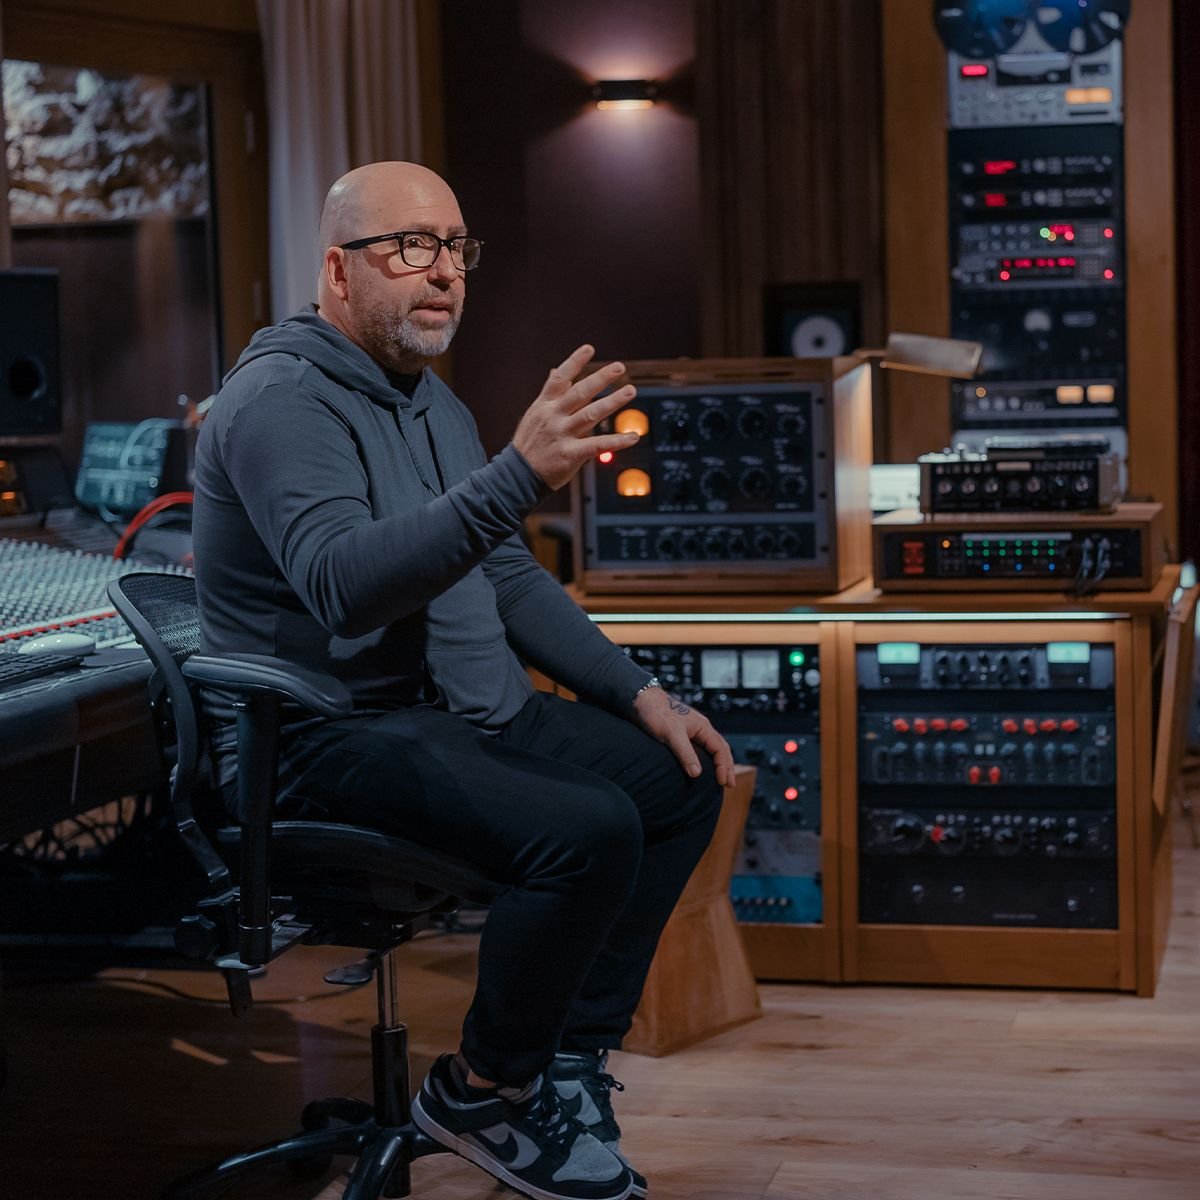 Join Chris Gehringer in Paris for an exclusive two-day masterclass on November 14th & 15th! Get into the studio and learn his advanced techniques for digital mastering, as used on award-winning albums by Rosalía, Drake, BTS, Rihanna, Lorde and more. Link in bio!